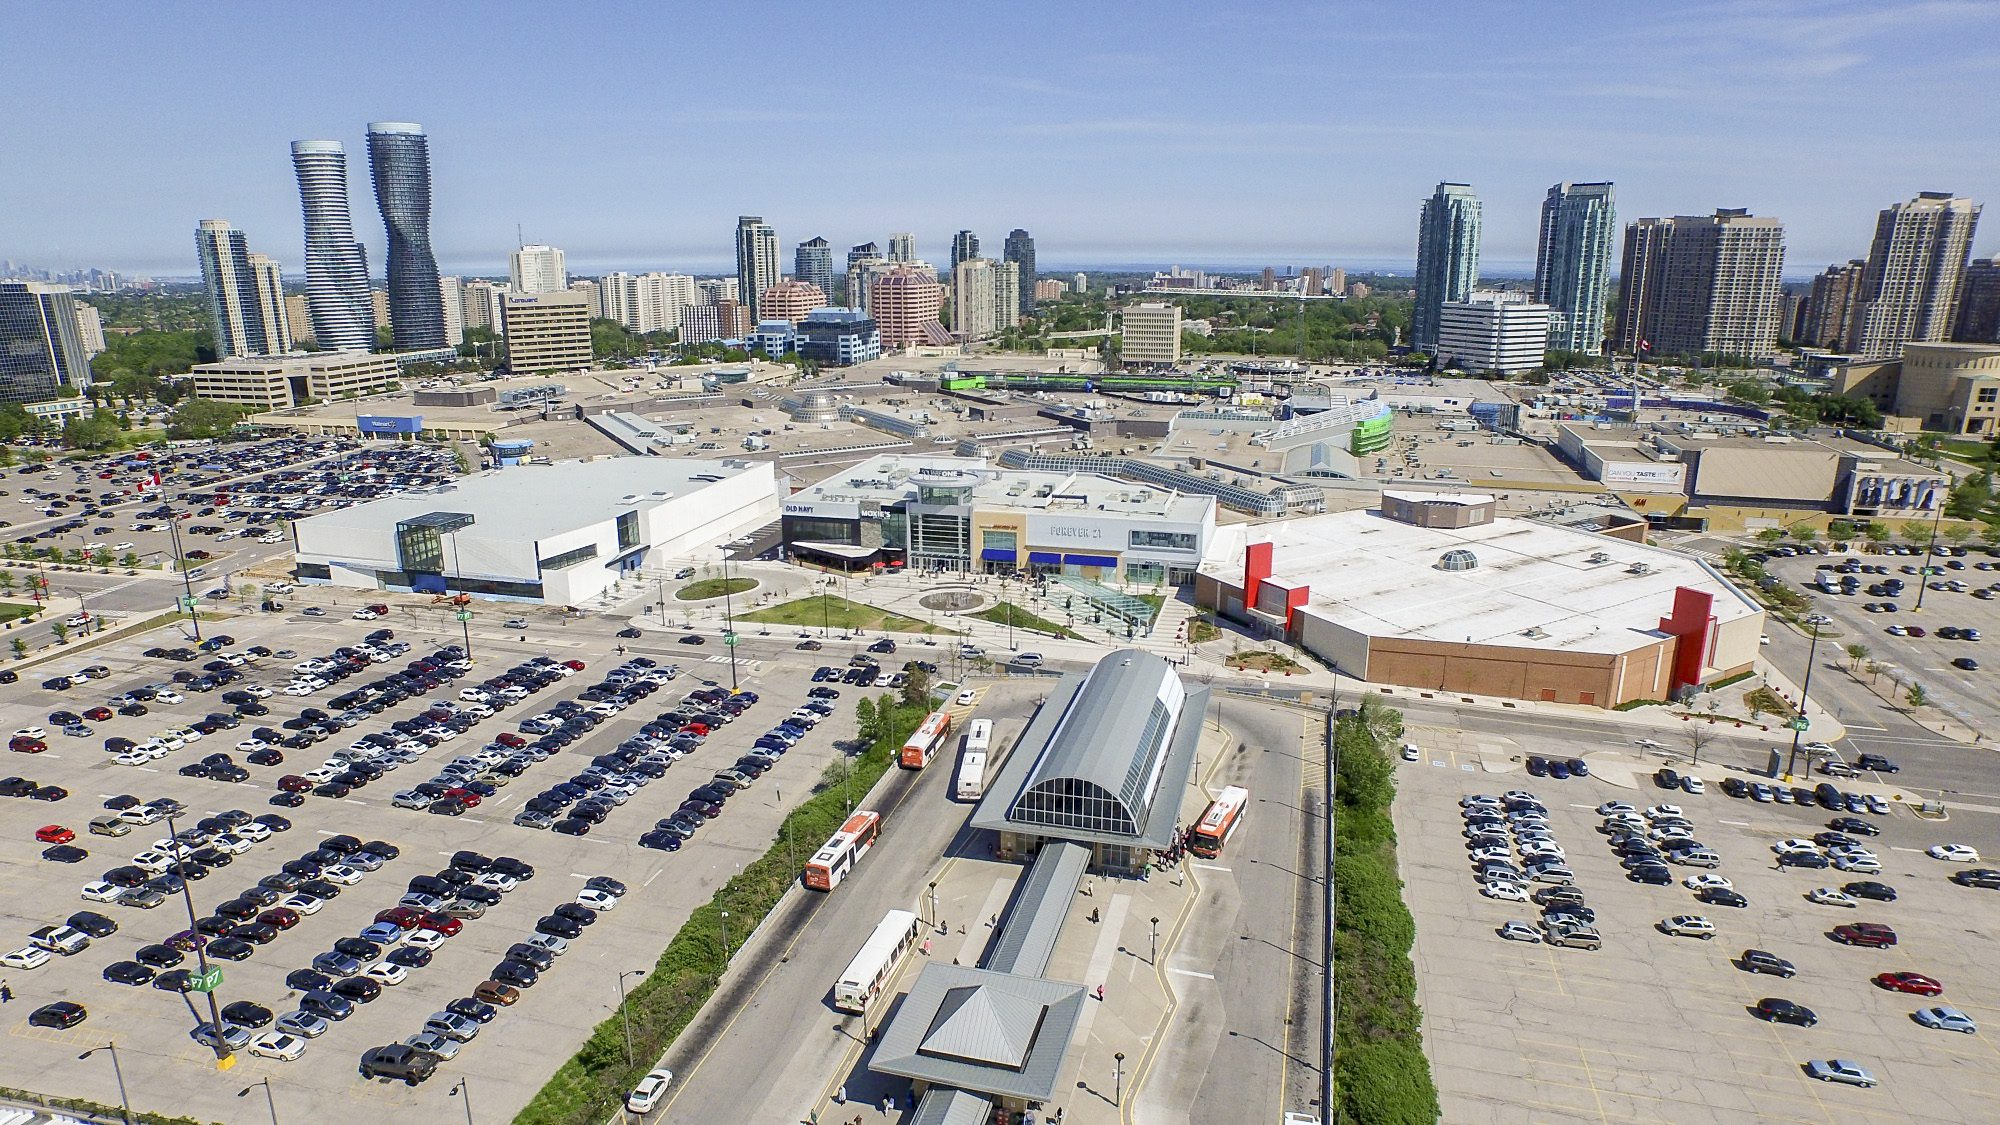 Square One Mall Aerial with city in background